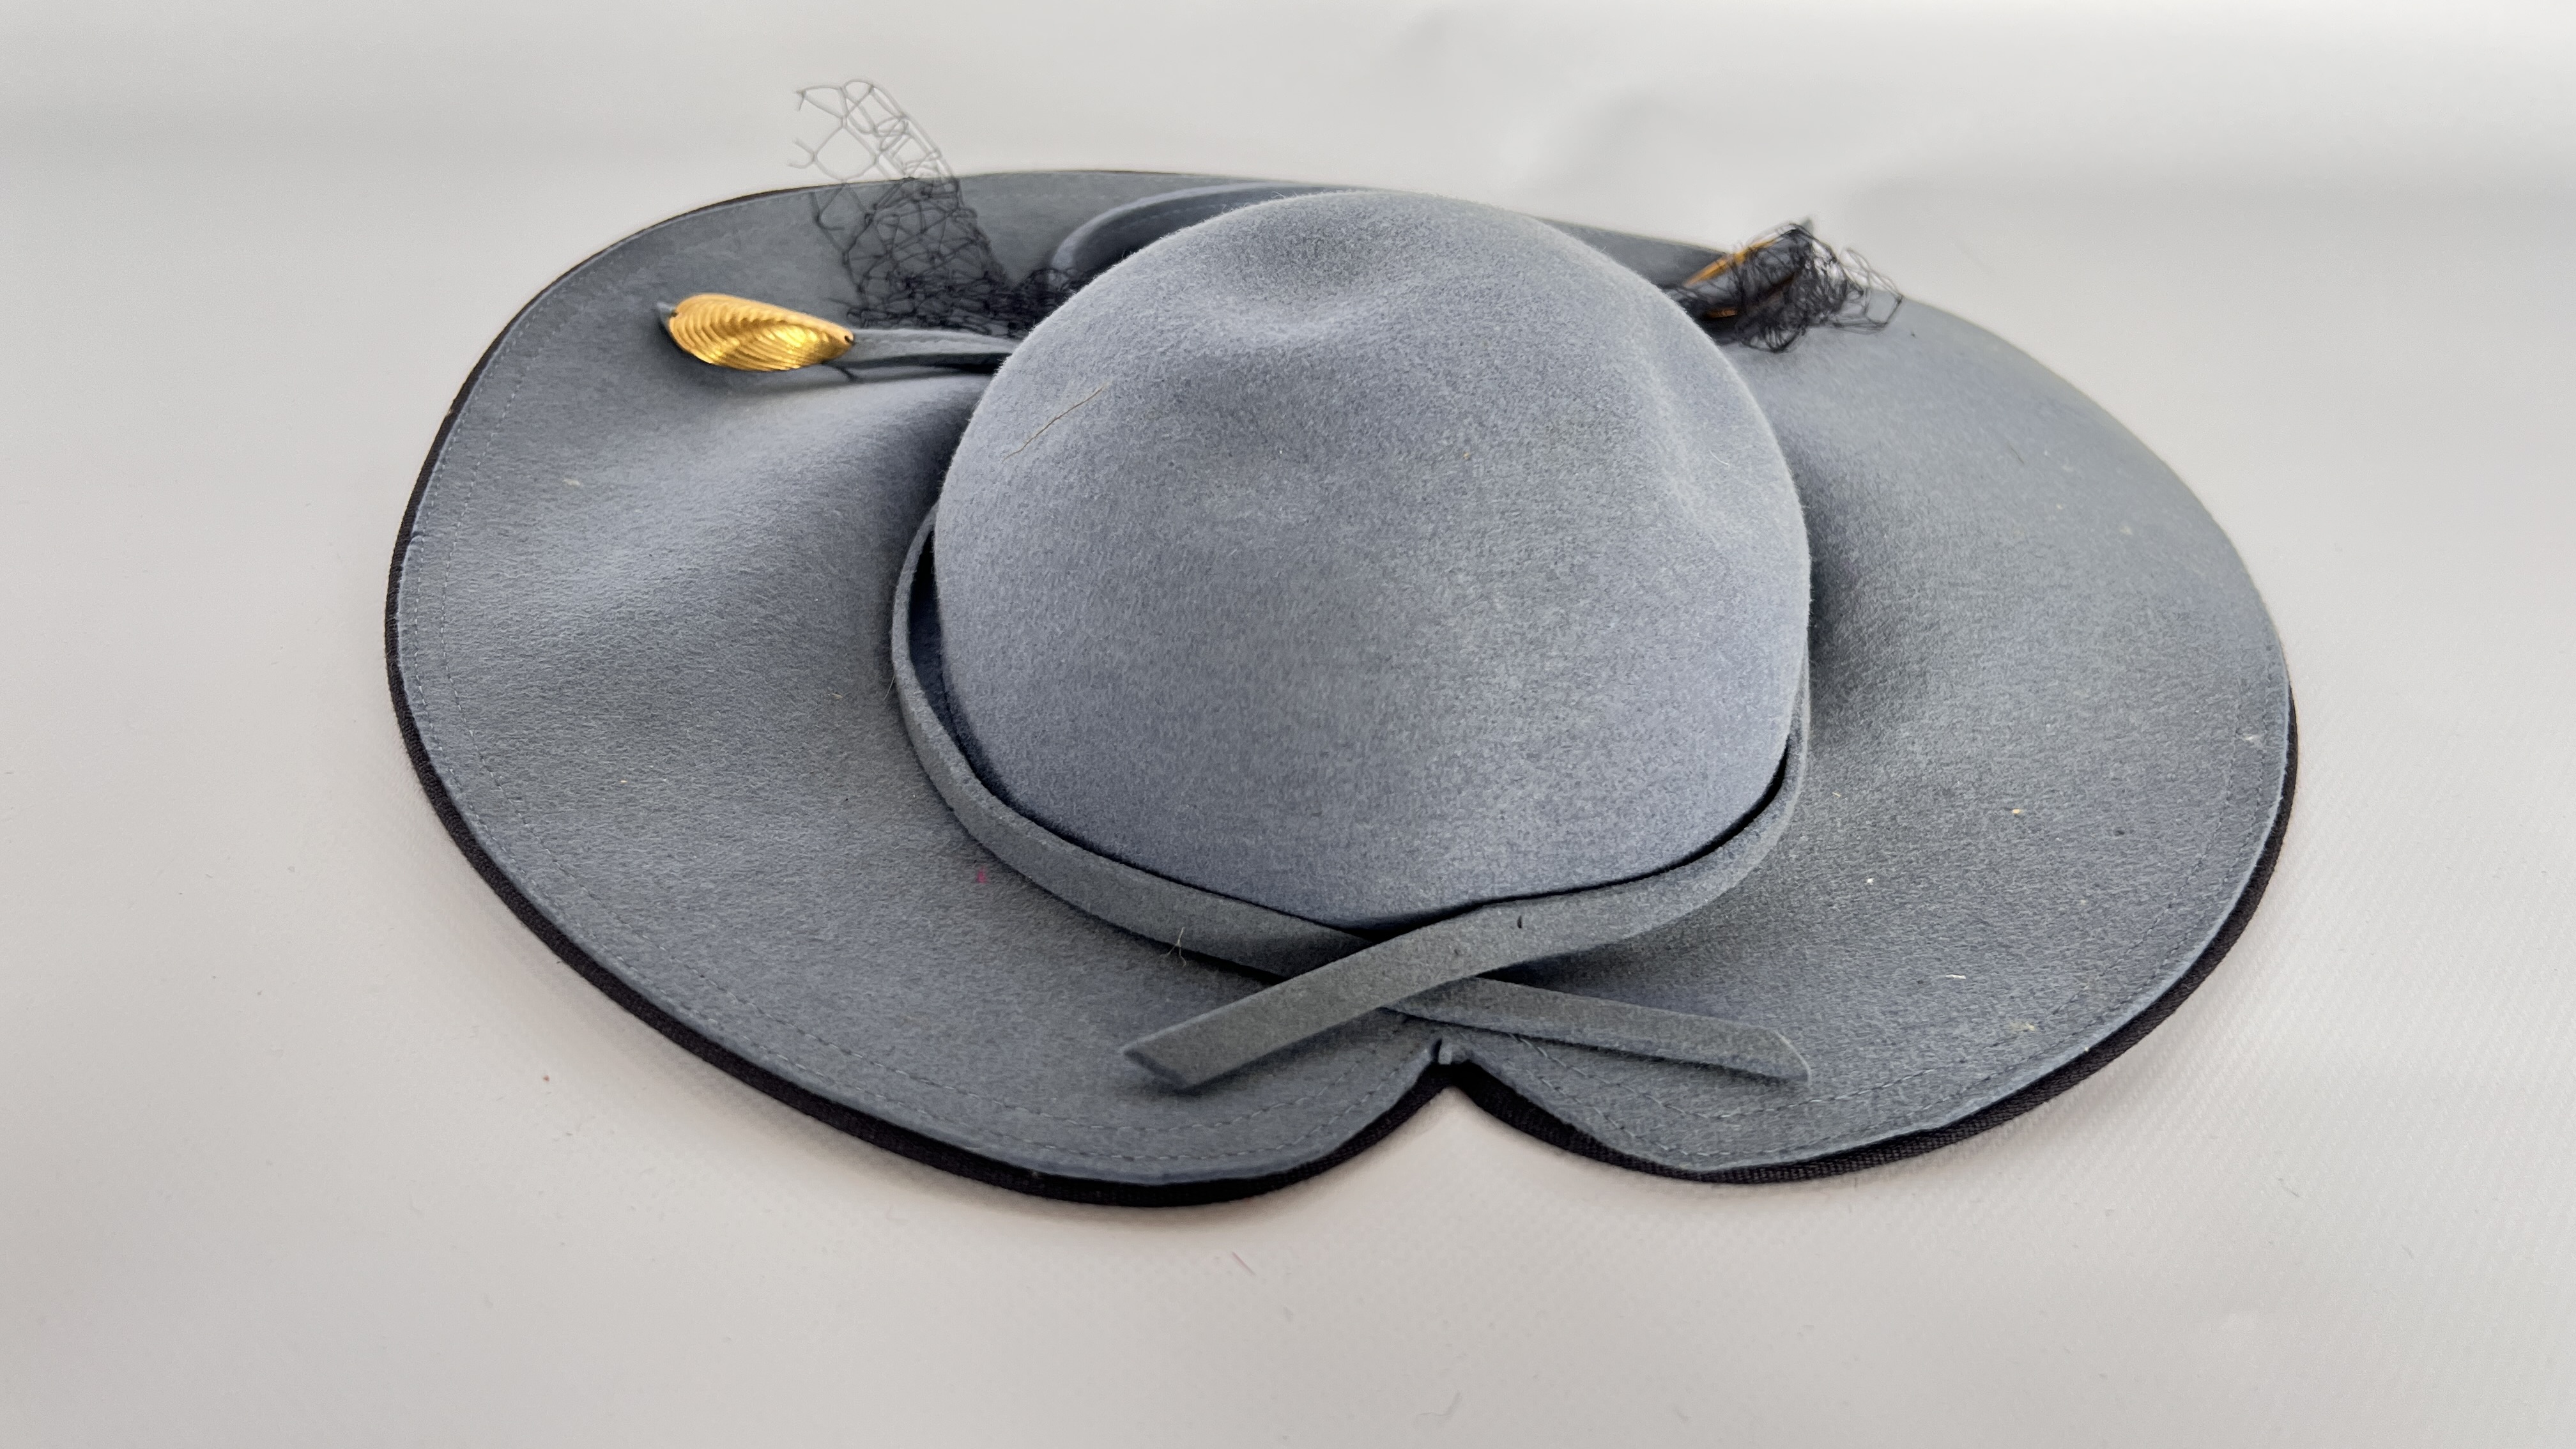 5 1940/50S HATS, 1 MULTI COLOURED FEATHER, 1LILAC/GREY STRAW (FADED) WITH FLOWERS, 1 BROWN STRAW, - Image 24 of 27